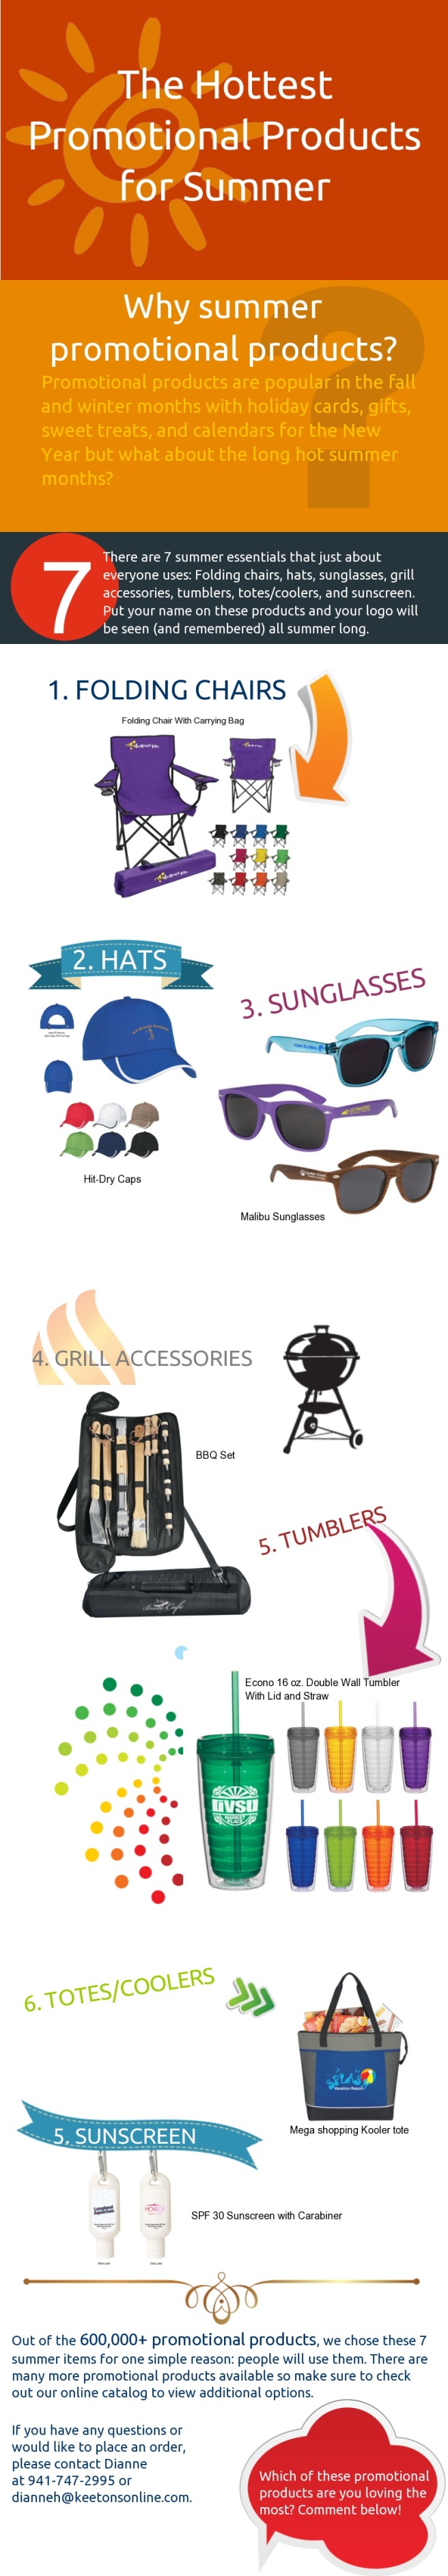 The Hottest Promotional Products for Summer (Infographic)